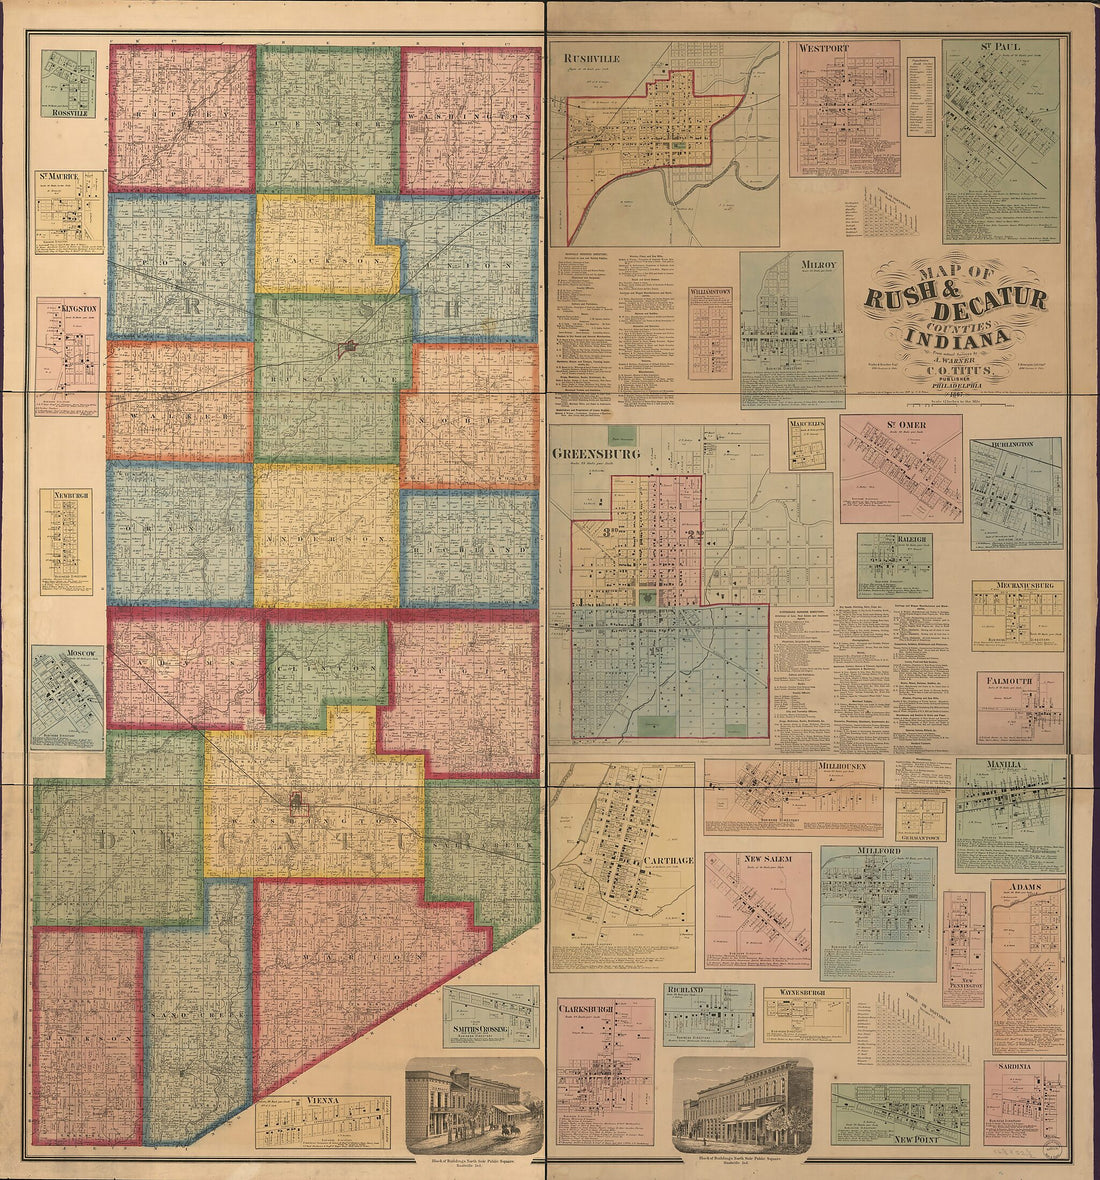 This old map of Map of Rush &amp; Decatur Counties, Indiana from 1867 was created by A. Warner in 1867